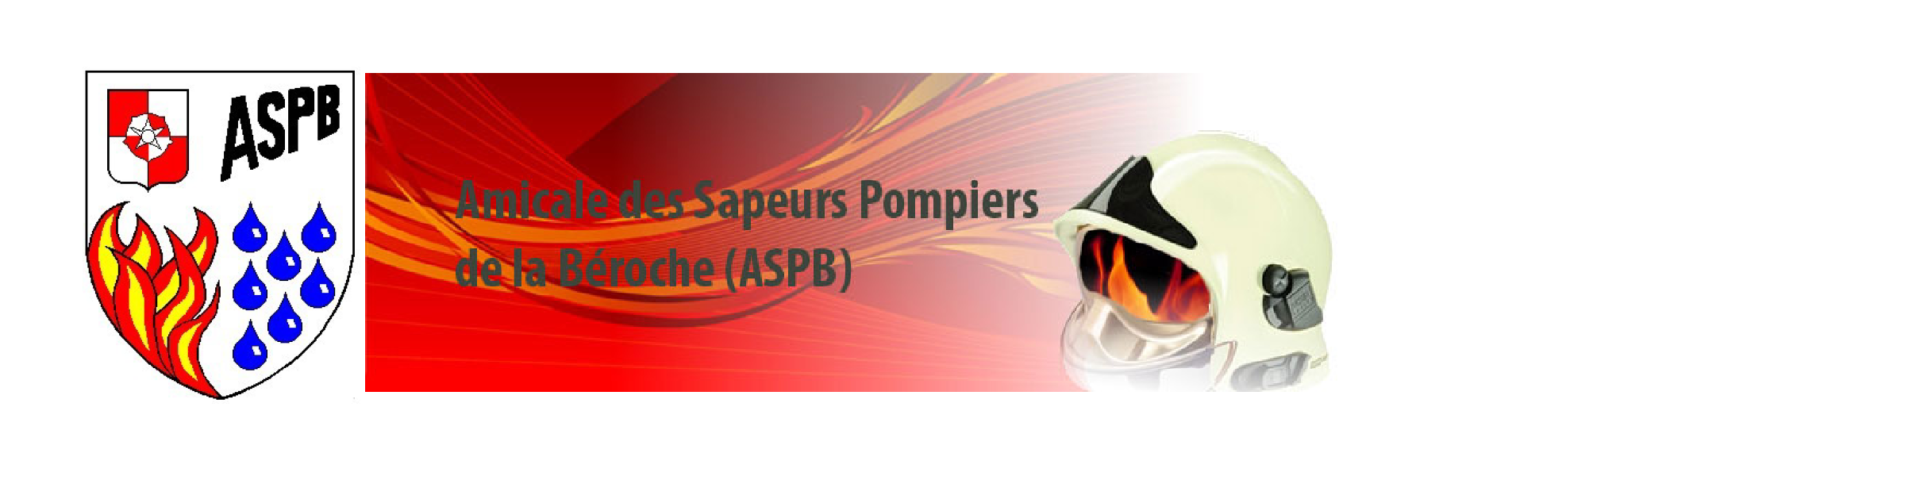 http://www.pompiers-beroche.org/wp-content/uploads/2020/12/cropped-Bandeaus_aspb3-3.png